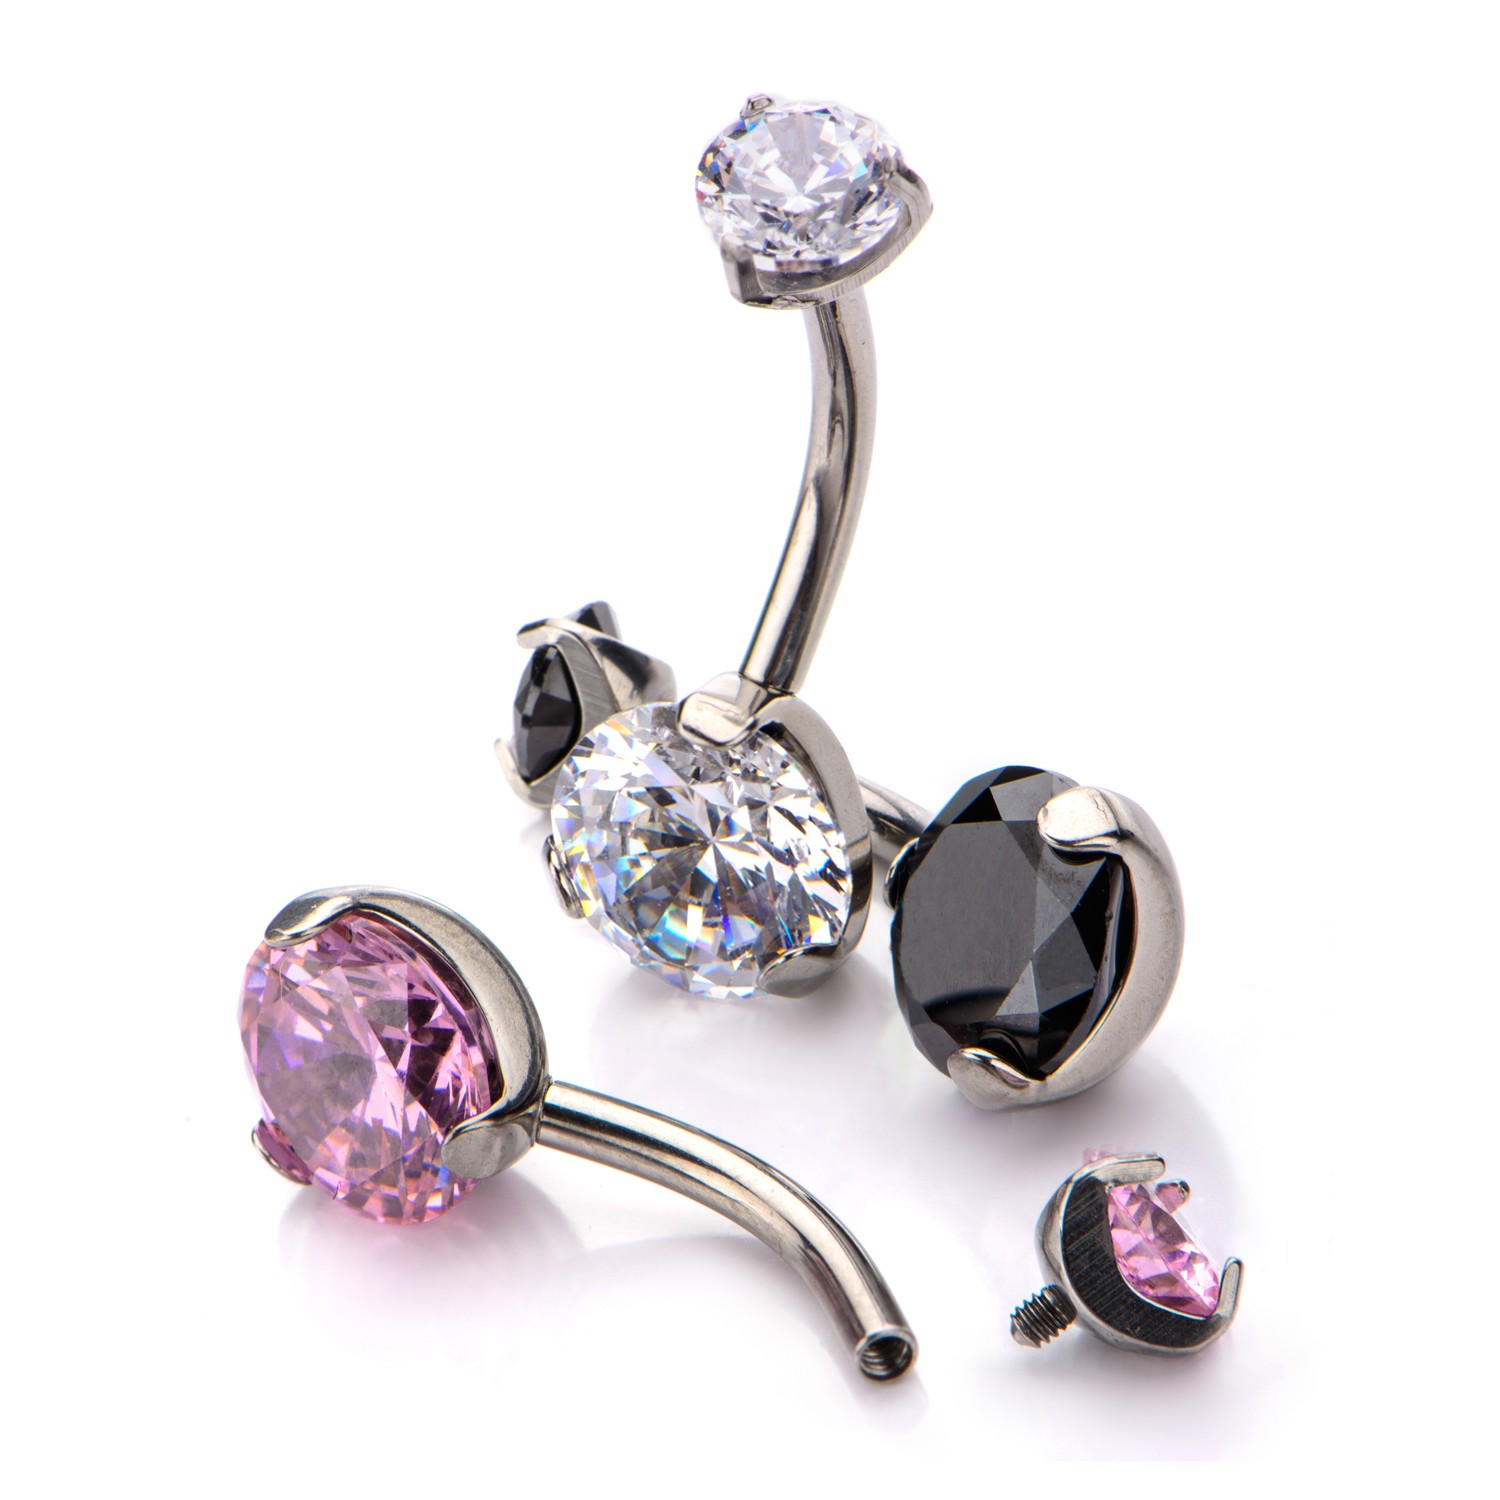 Black, pink, diamond belly button rings